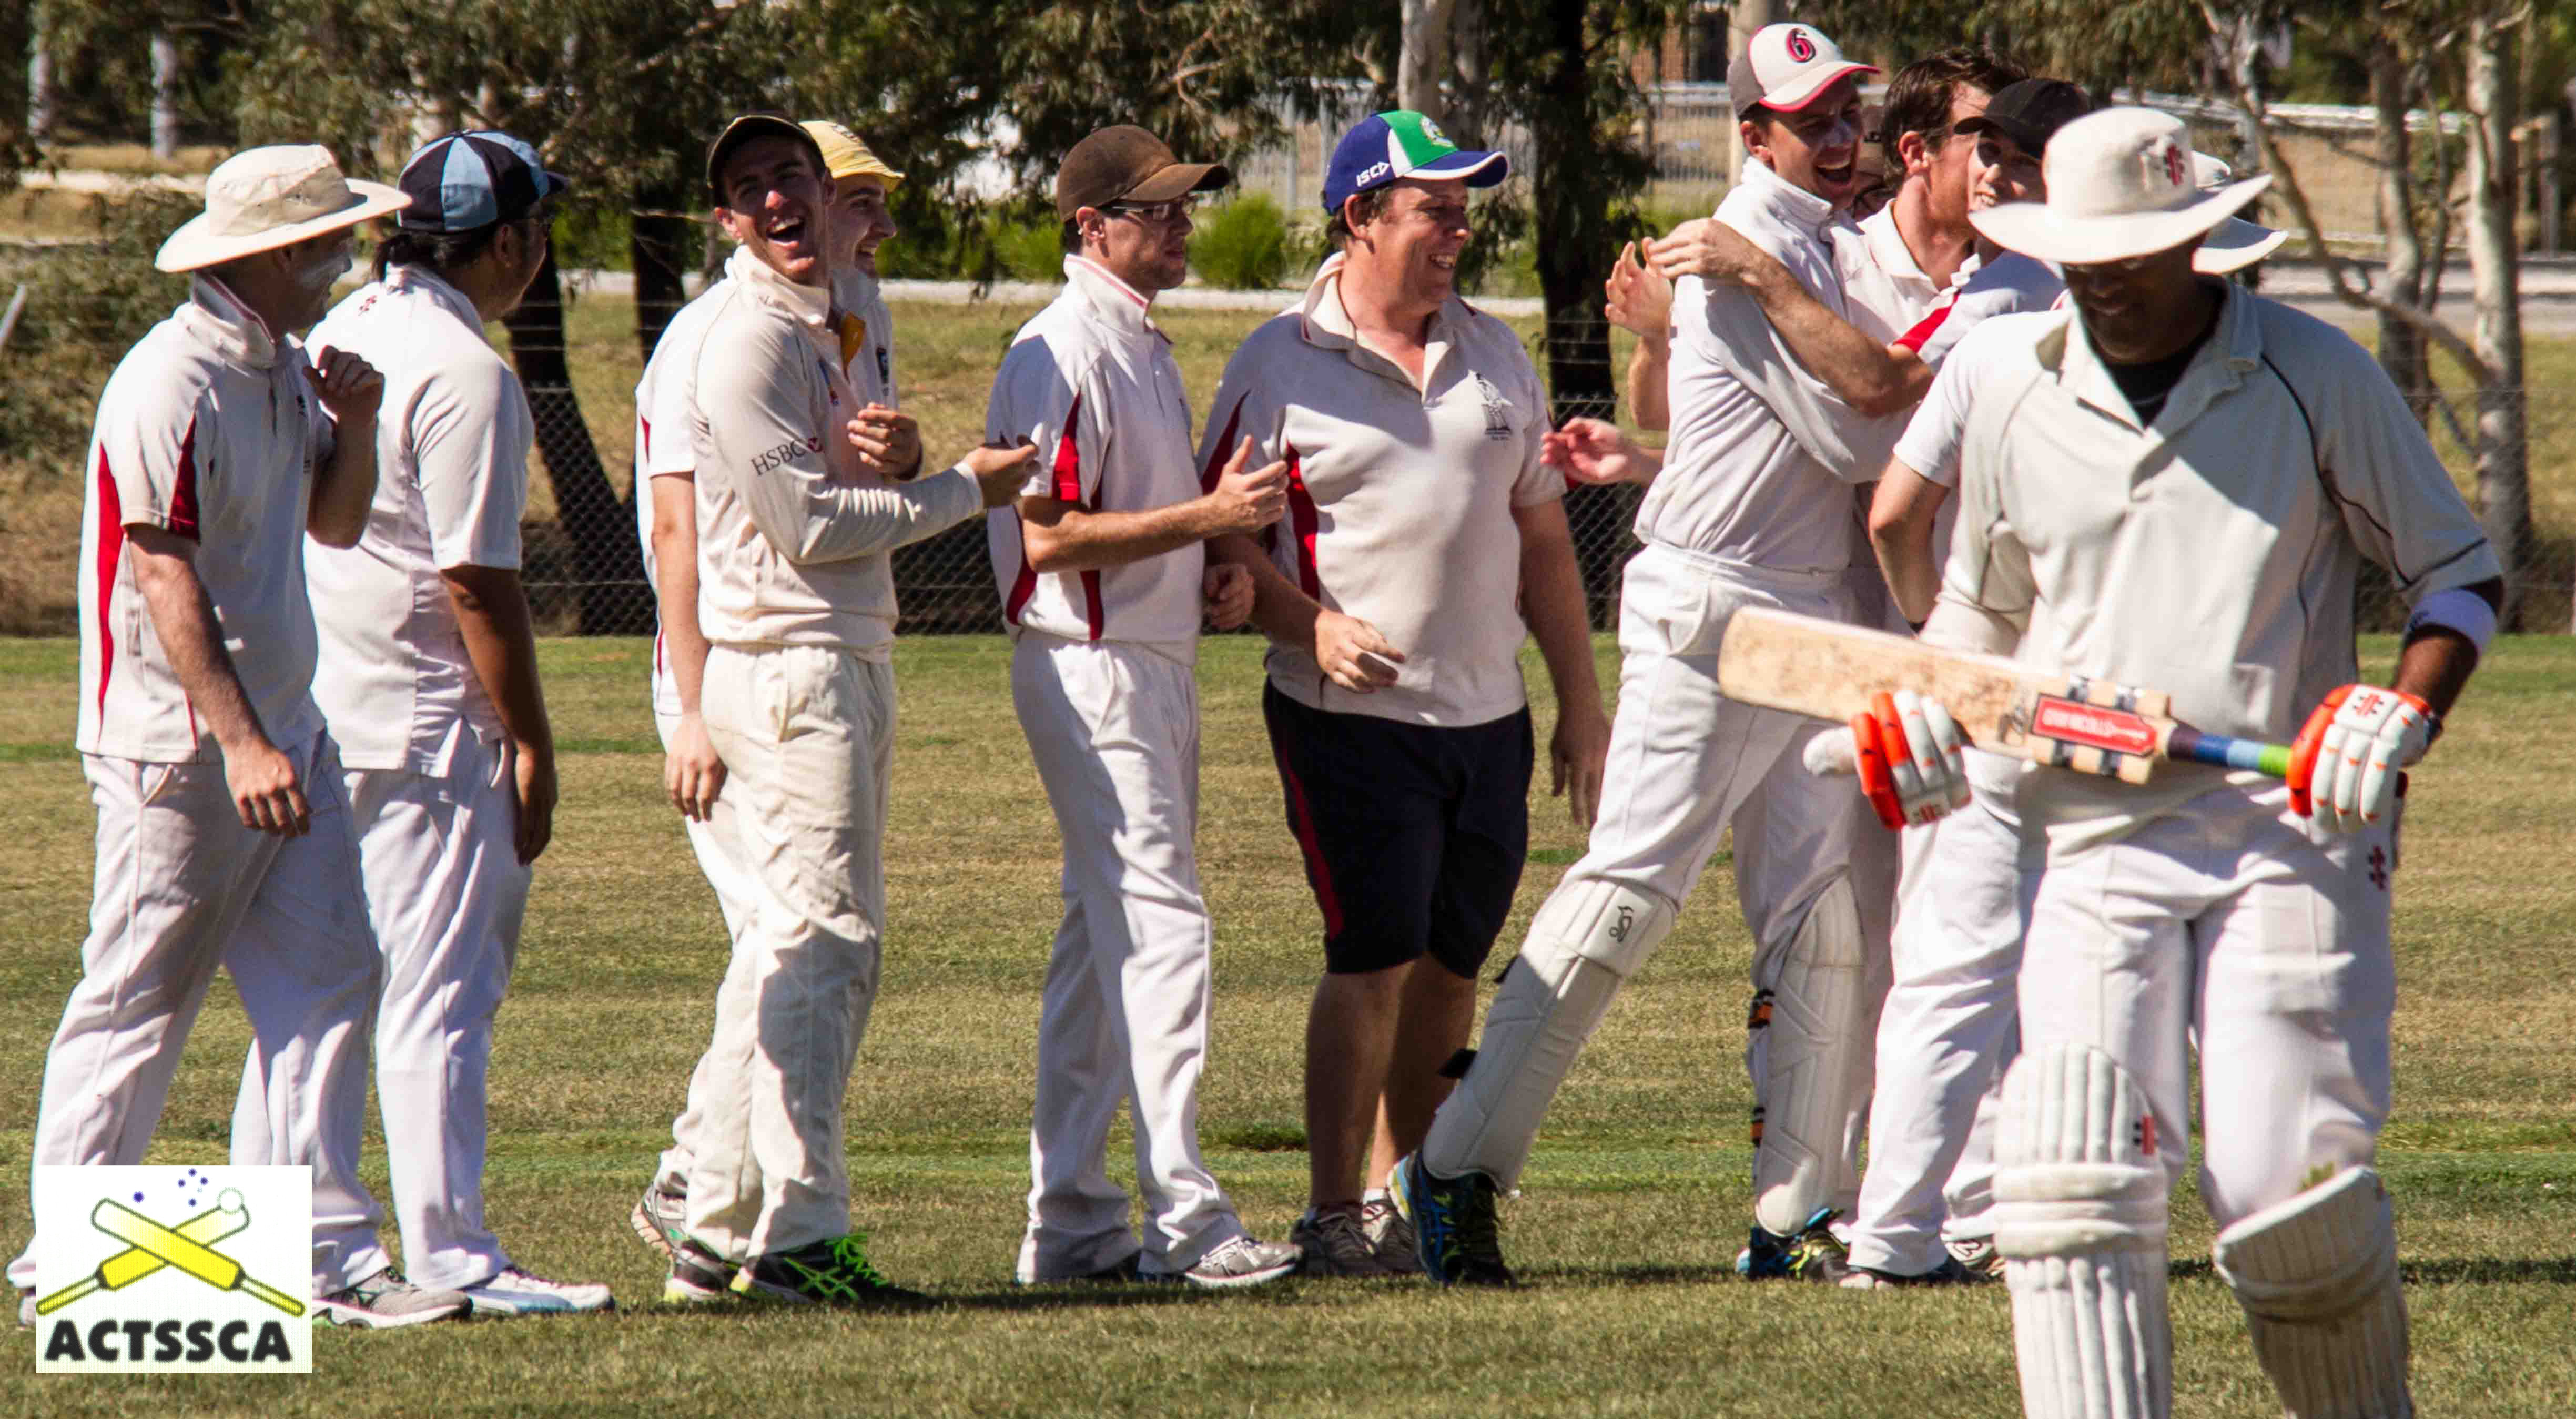 A group of cricketers celebrate the fall of a wicket